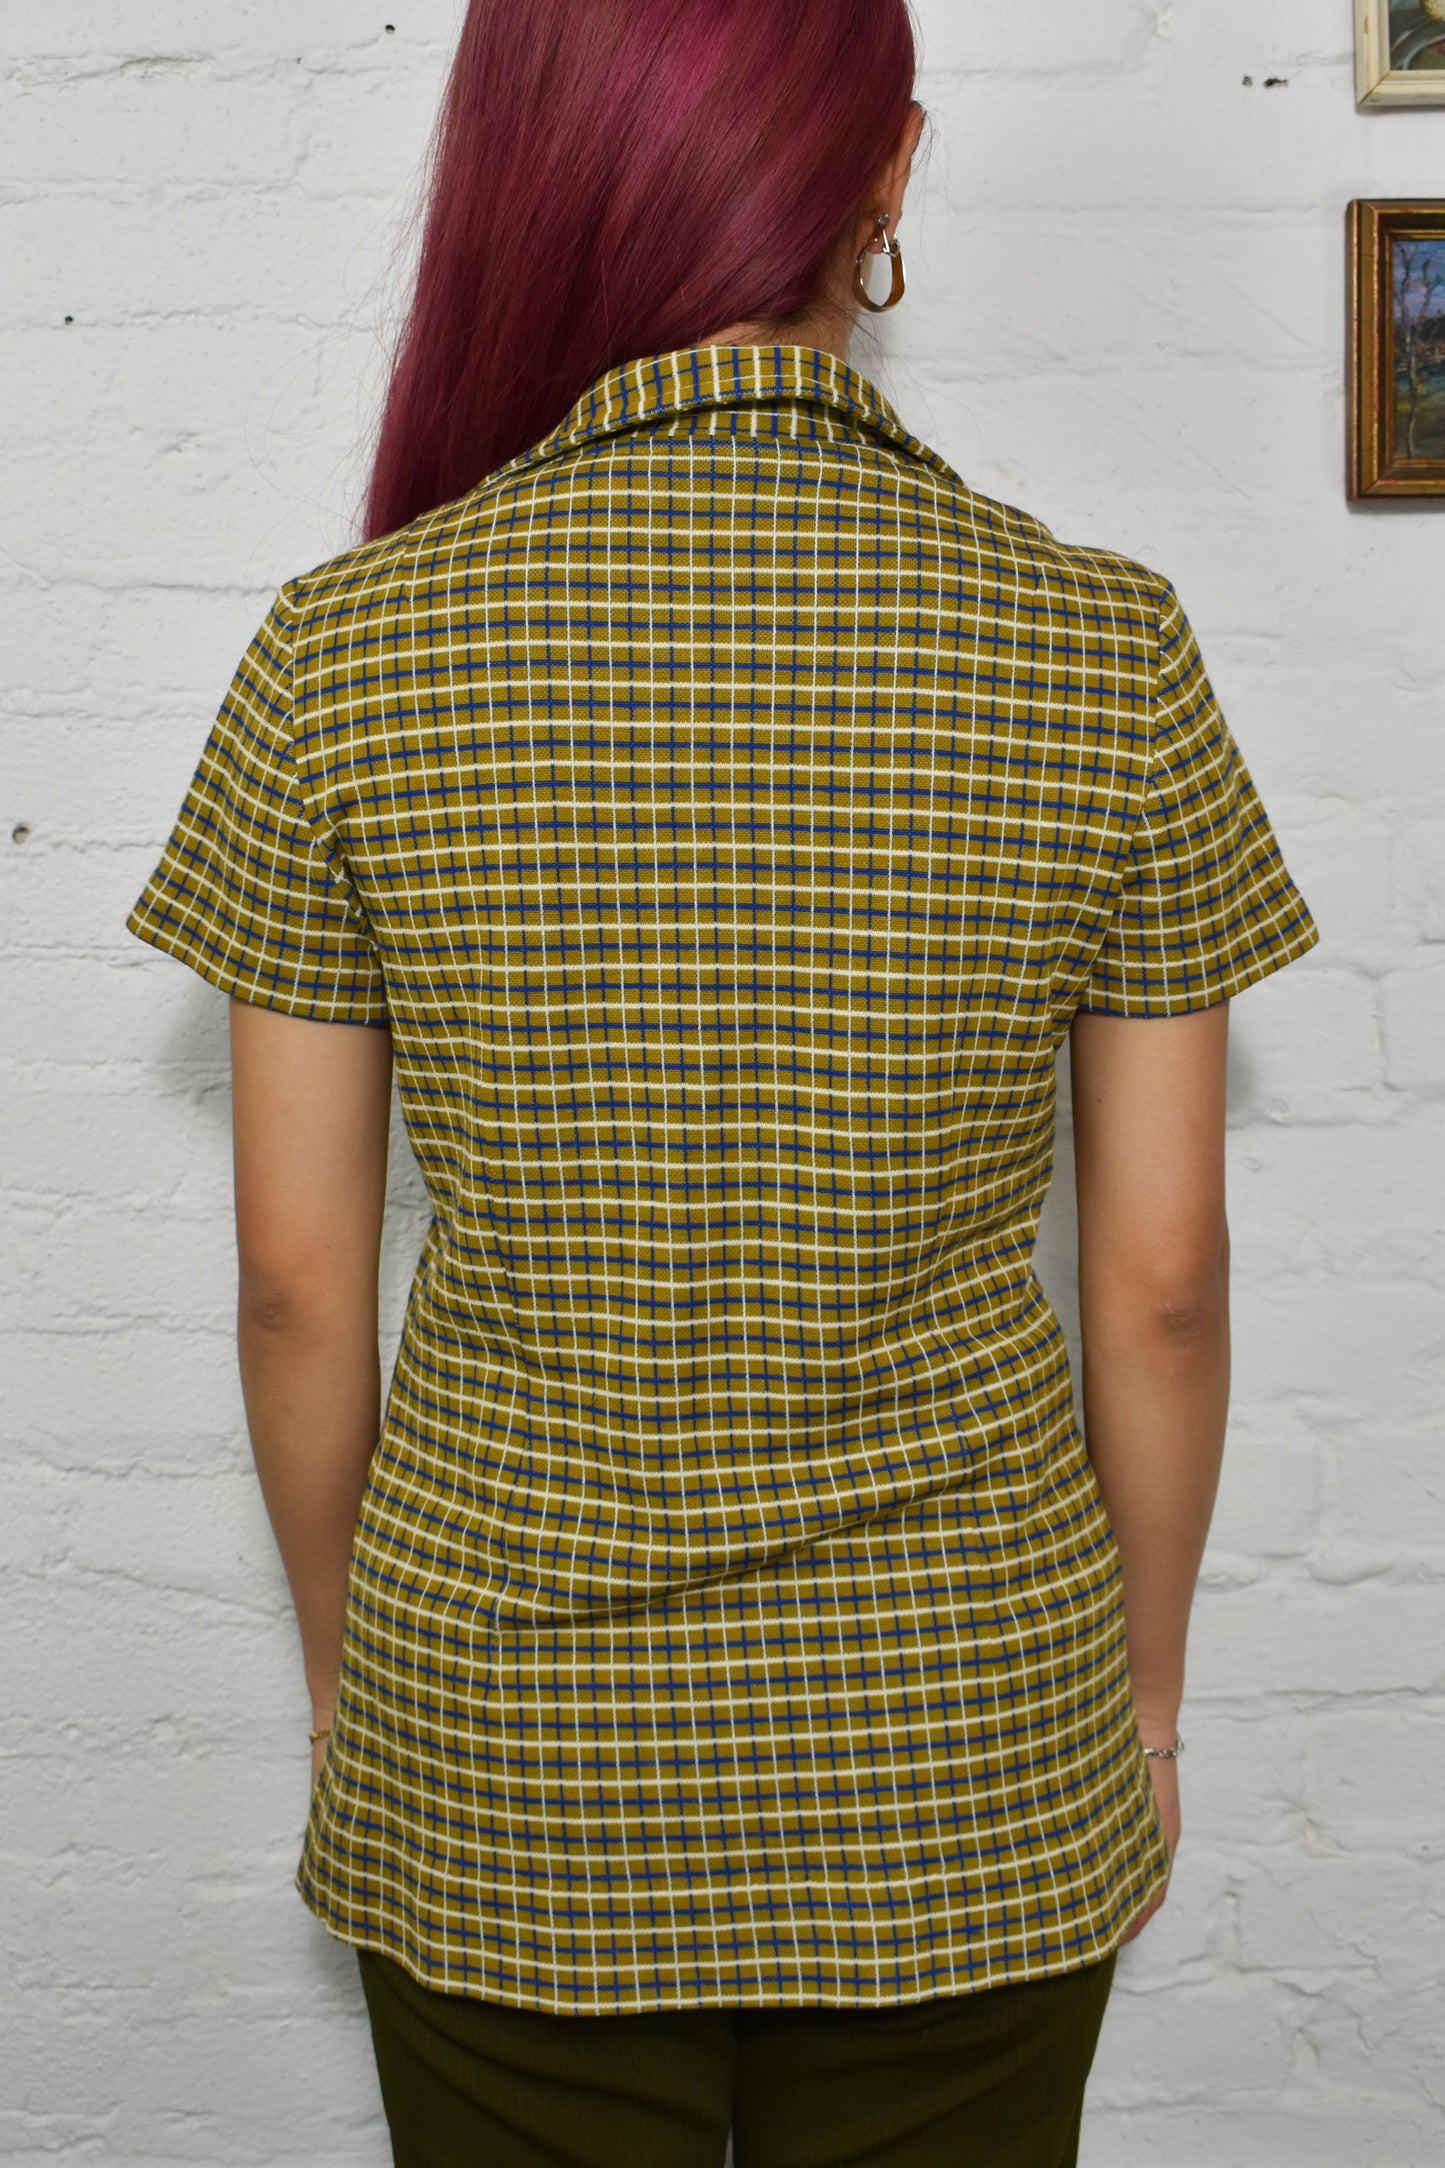 Vintage 1970's Checkered Tunic Top